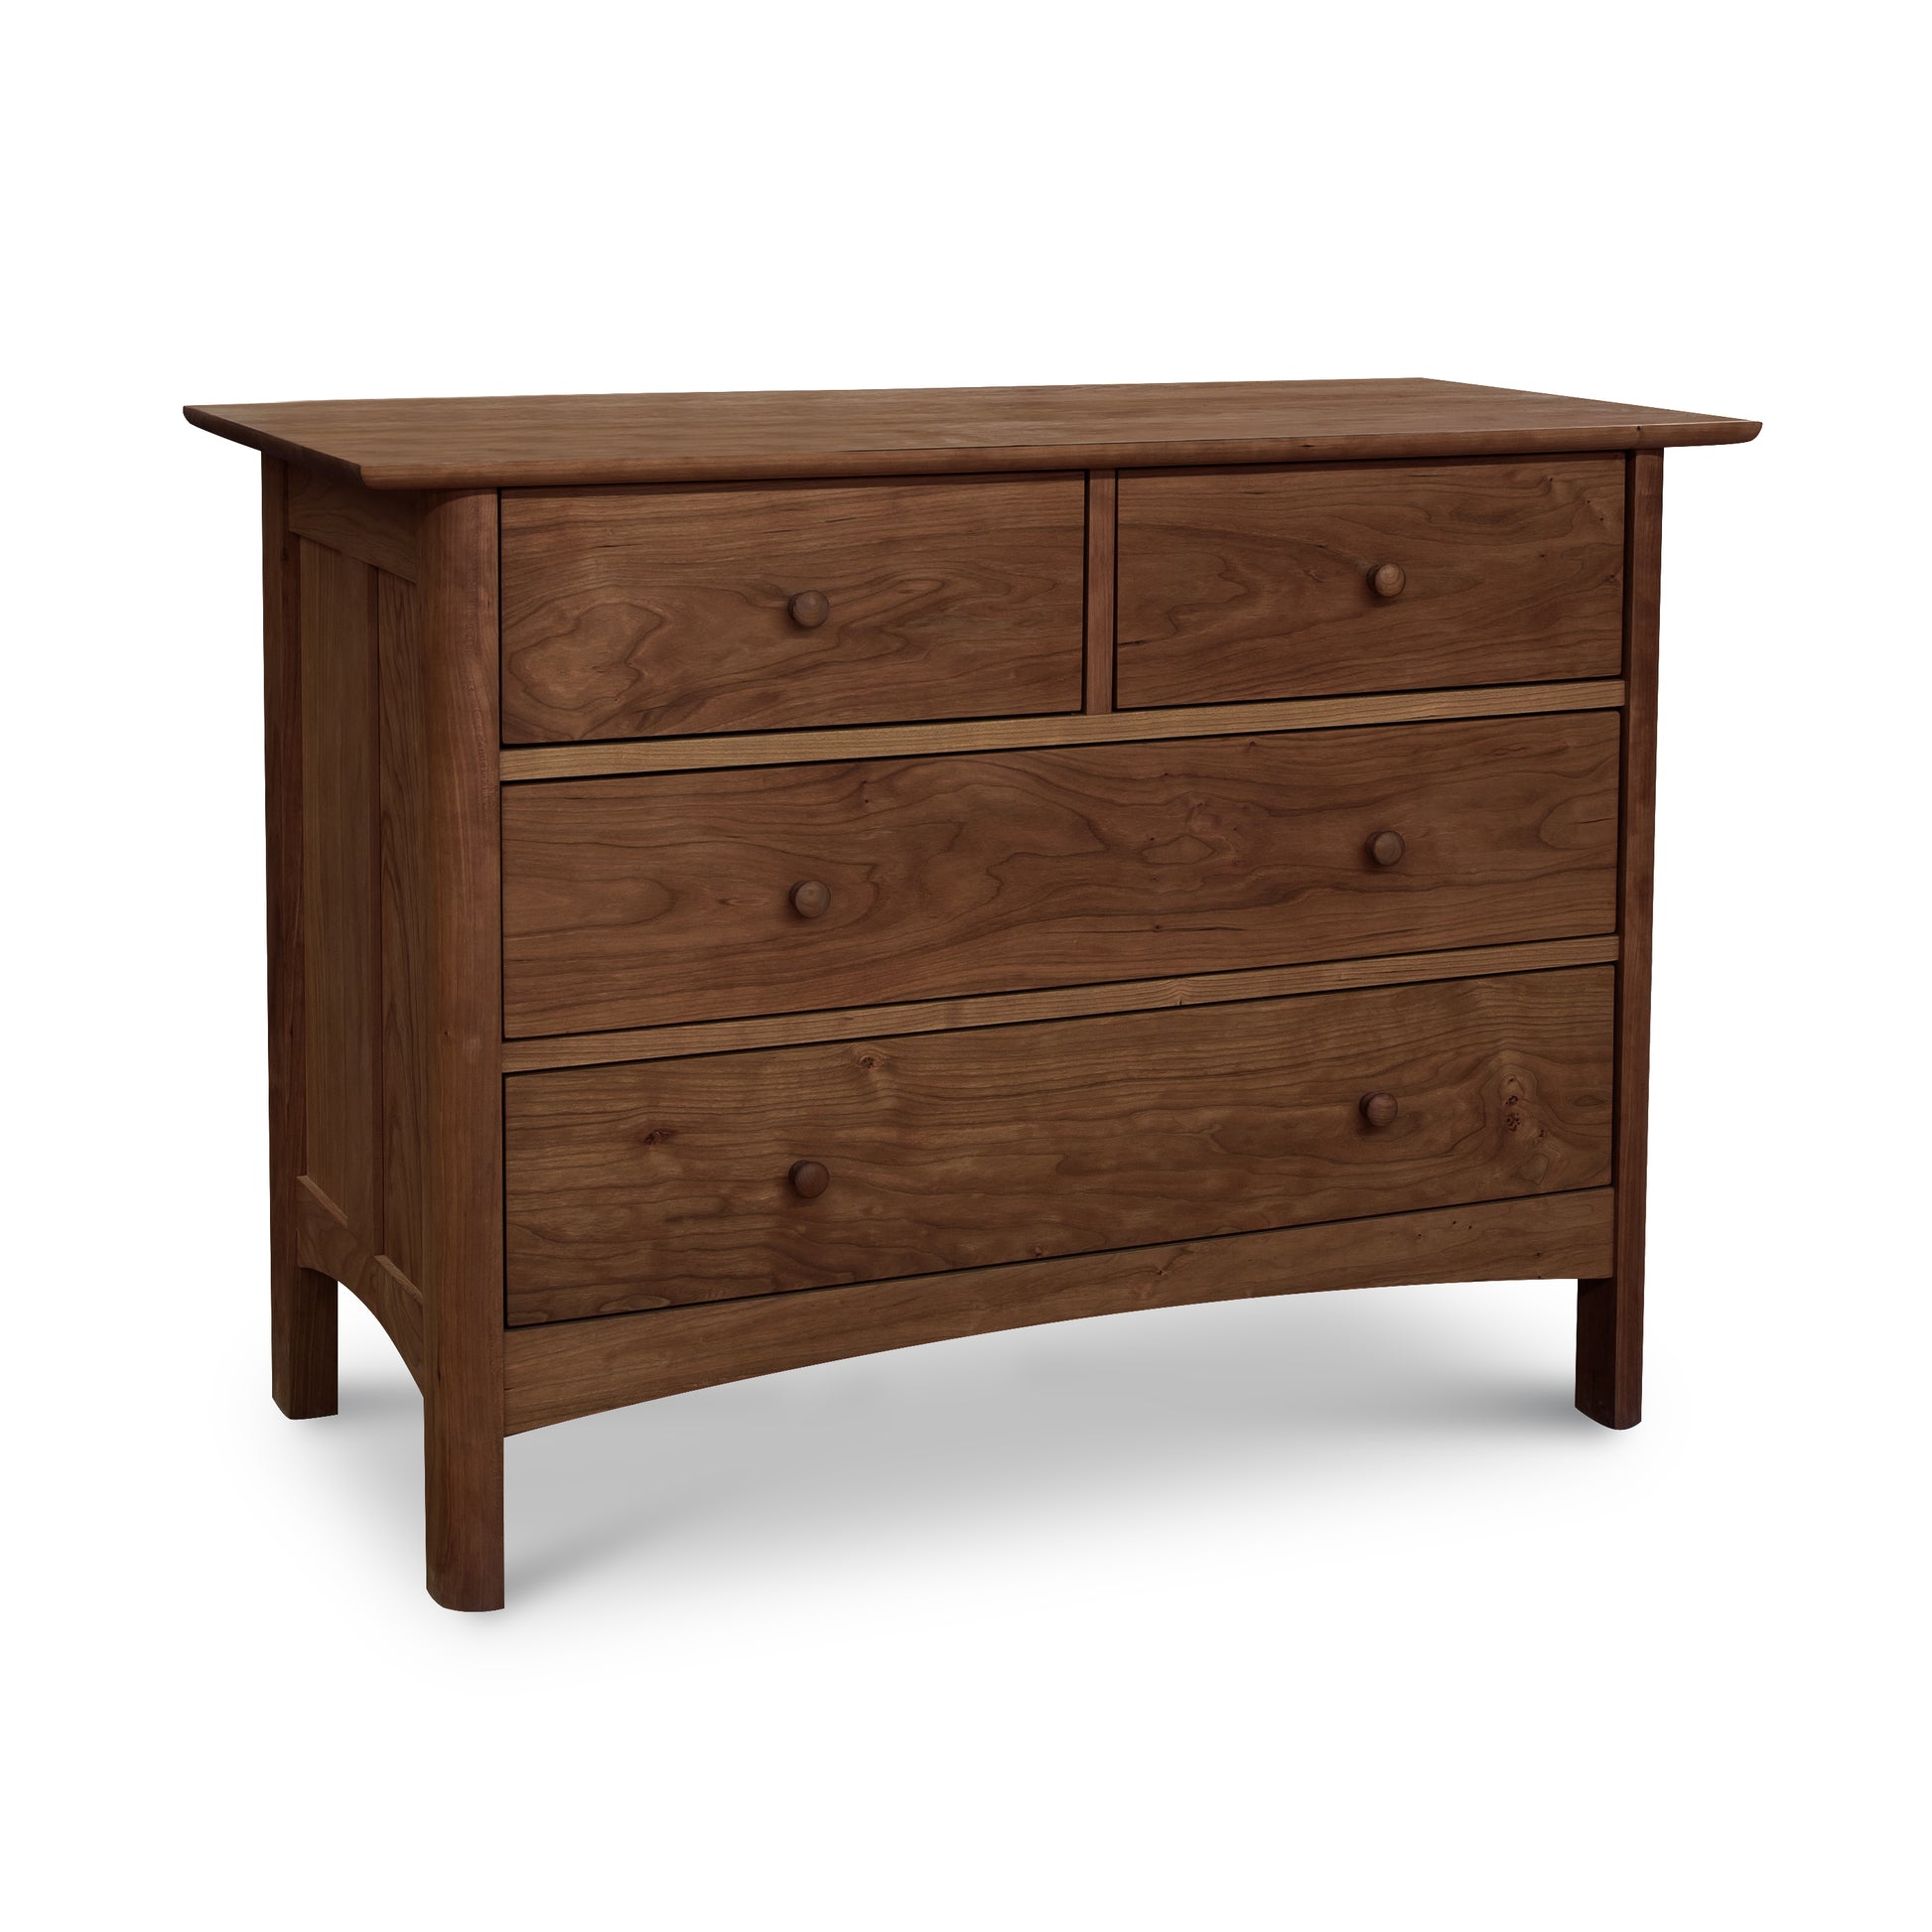 A Heartwood Shaker 4-Drawer Dresser by Vermont Furniture Designs on a white background.